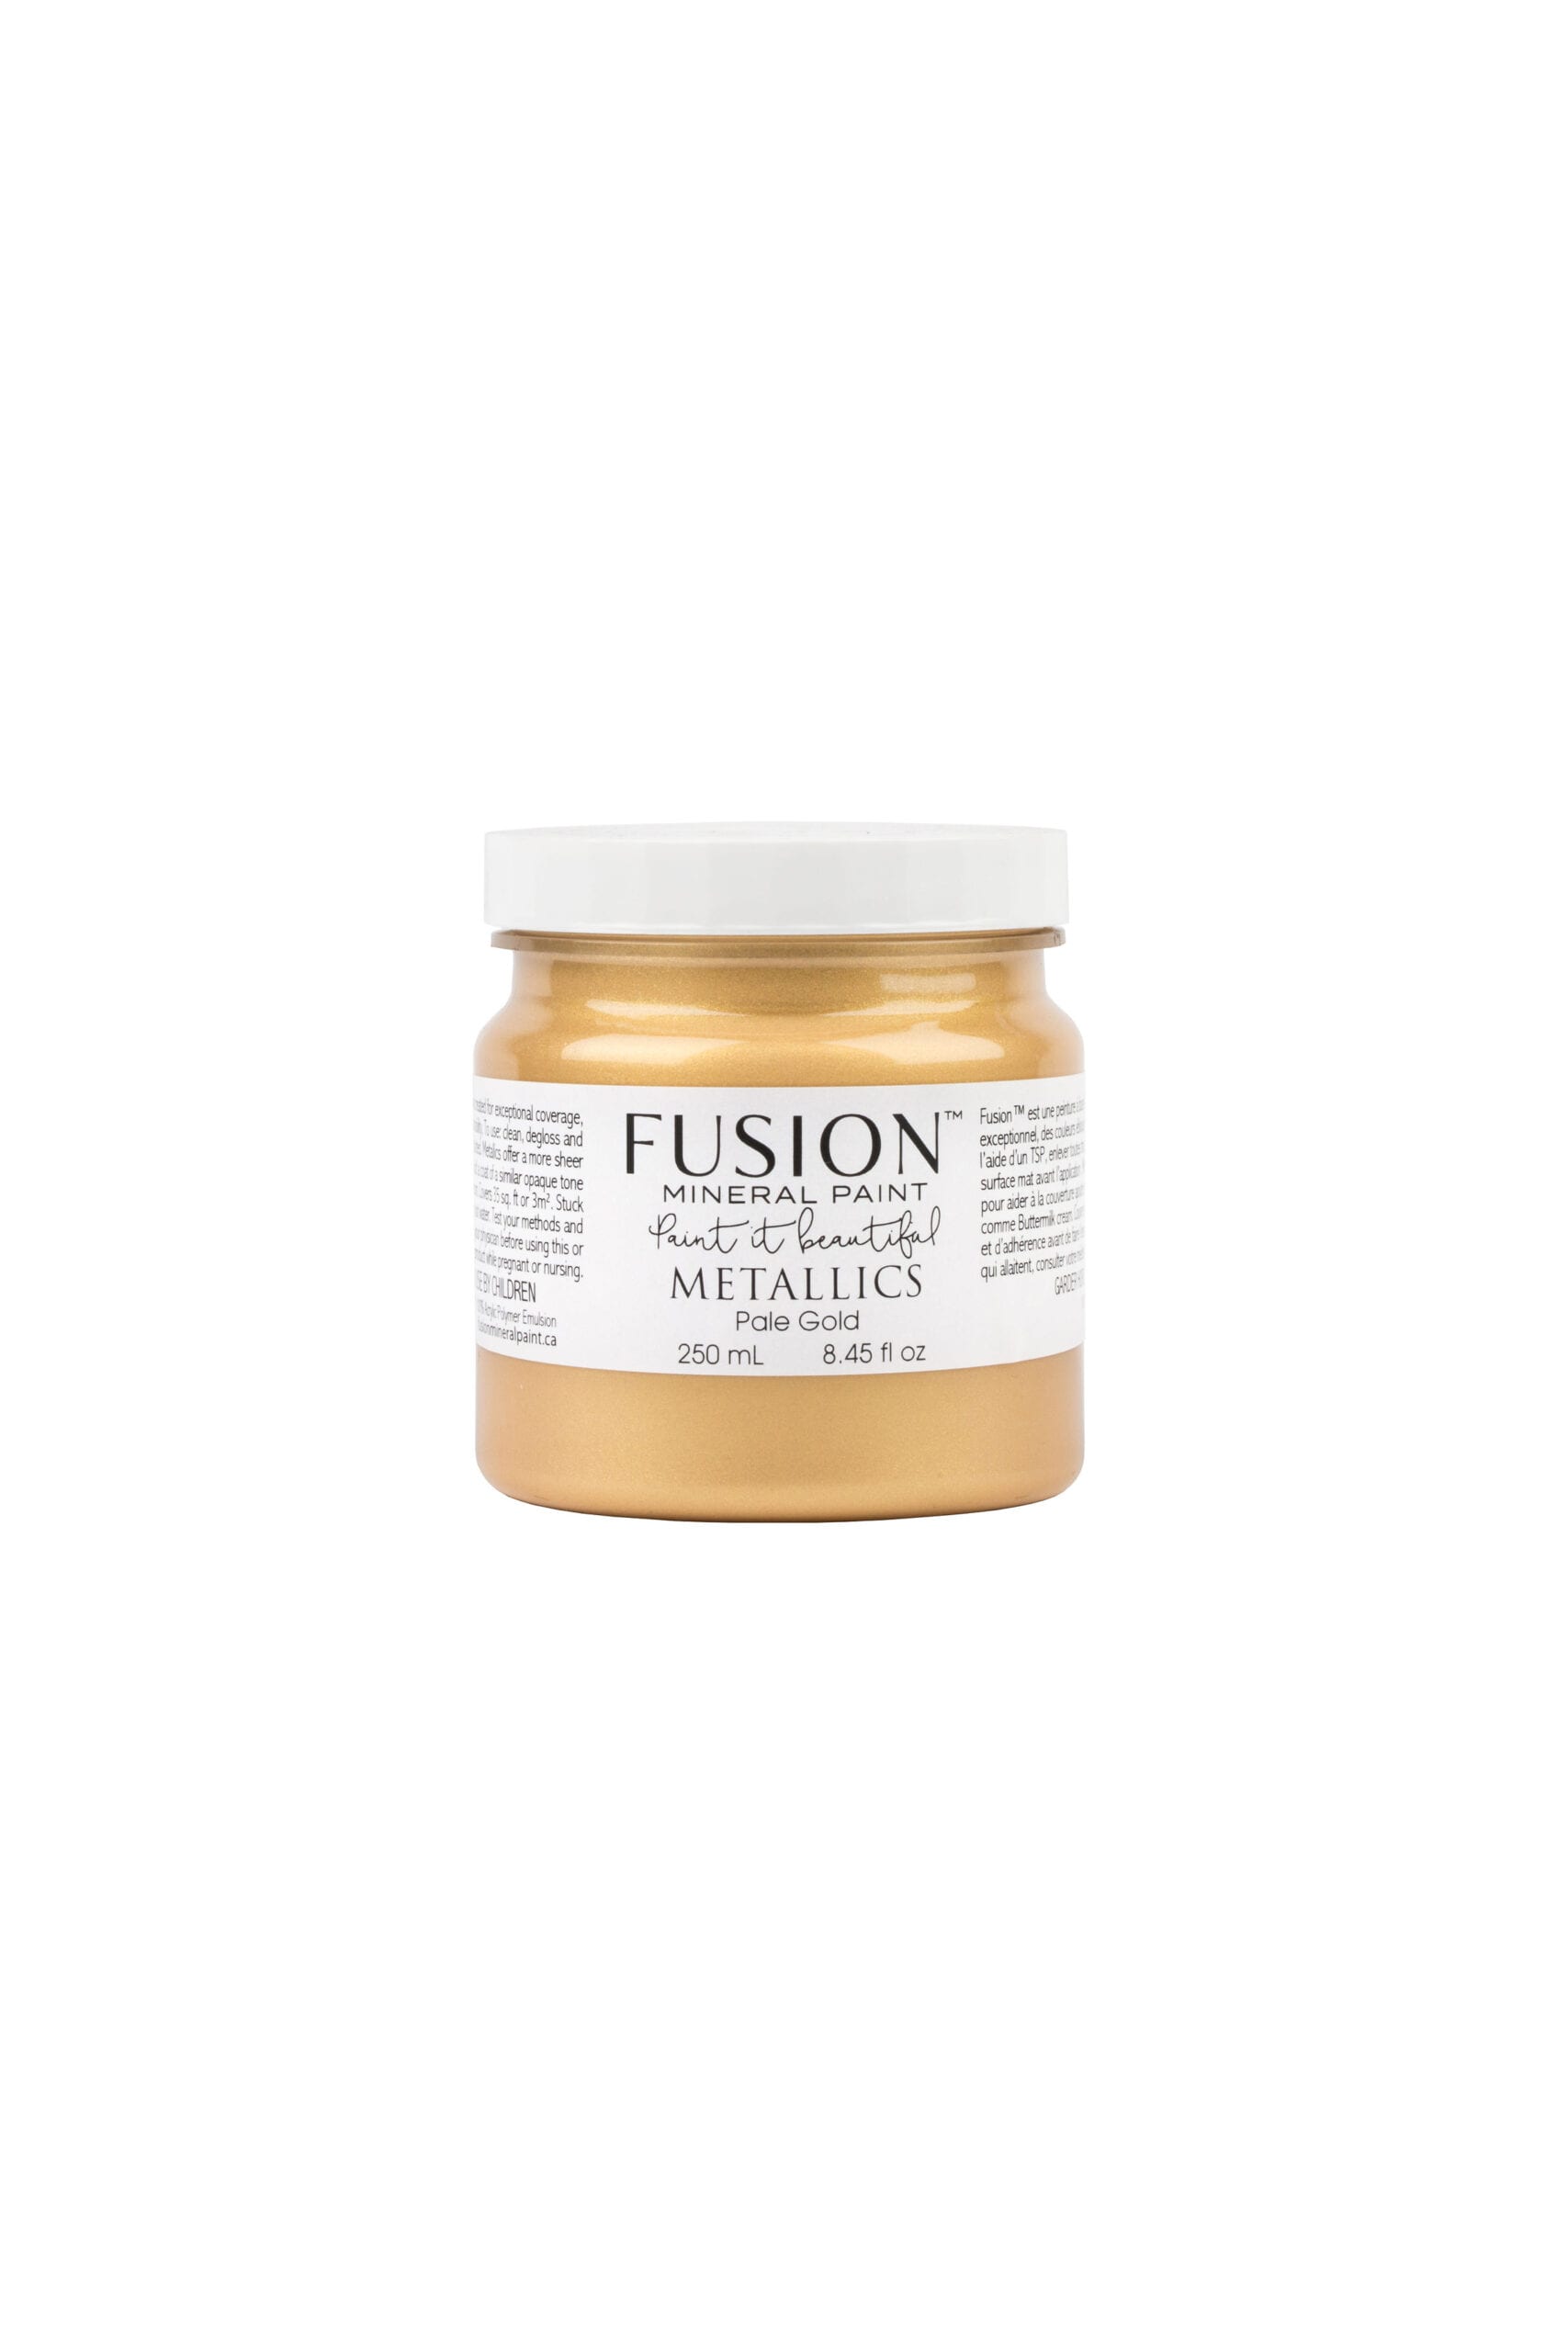 Fusion Mineral Metallic Paint -Pale Gold - Painted